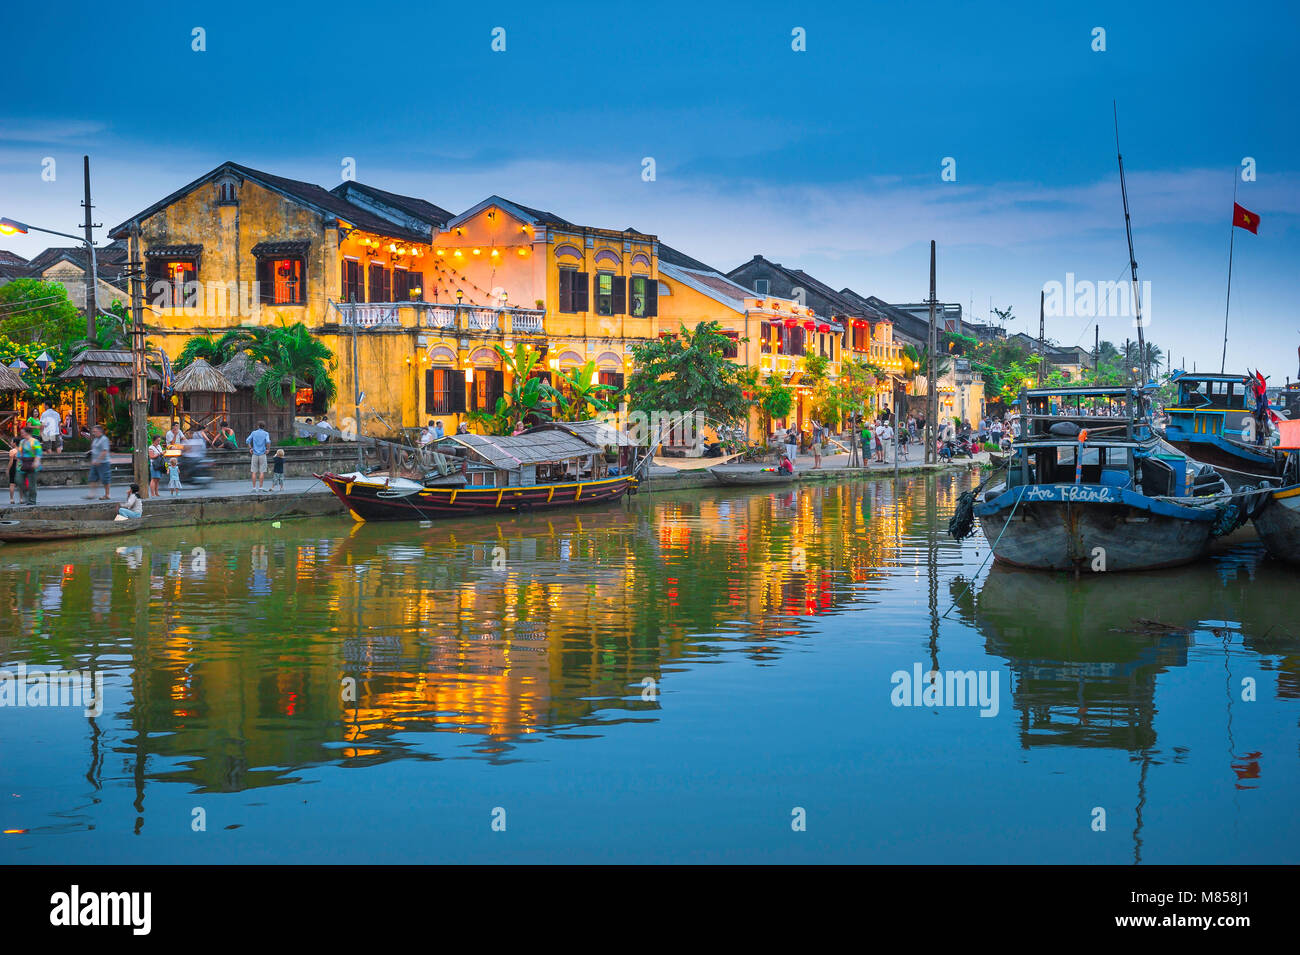 Vietnam travel, scenic view at dusk of the Thu Bon river and Old Town tourist quarter in Hoi An, Central Vietnam, Southeast Asia Stock Photo